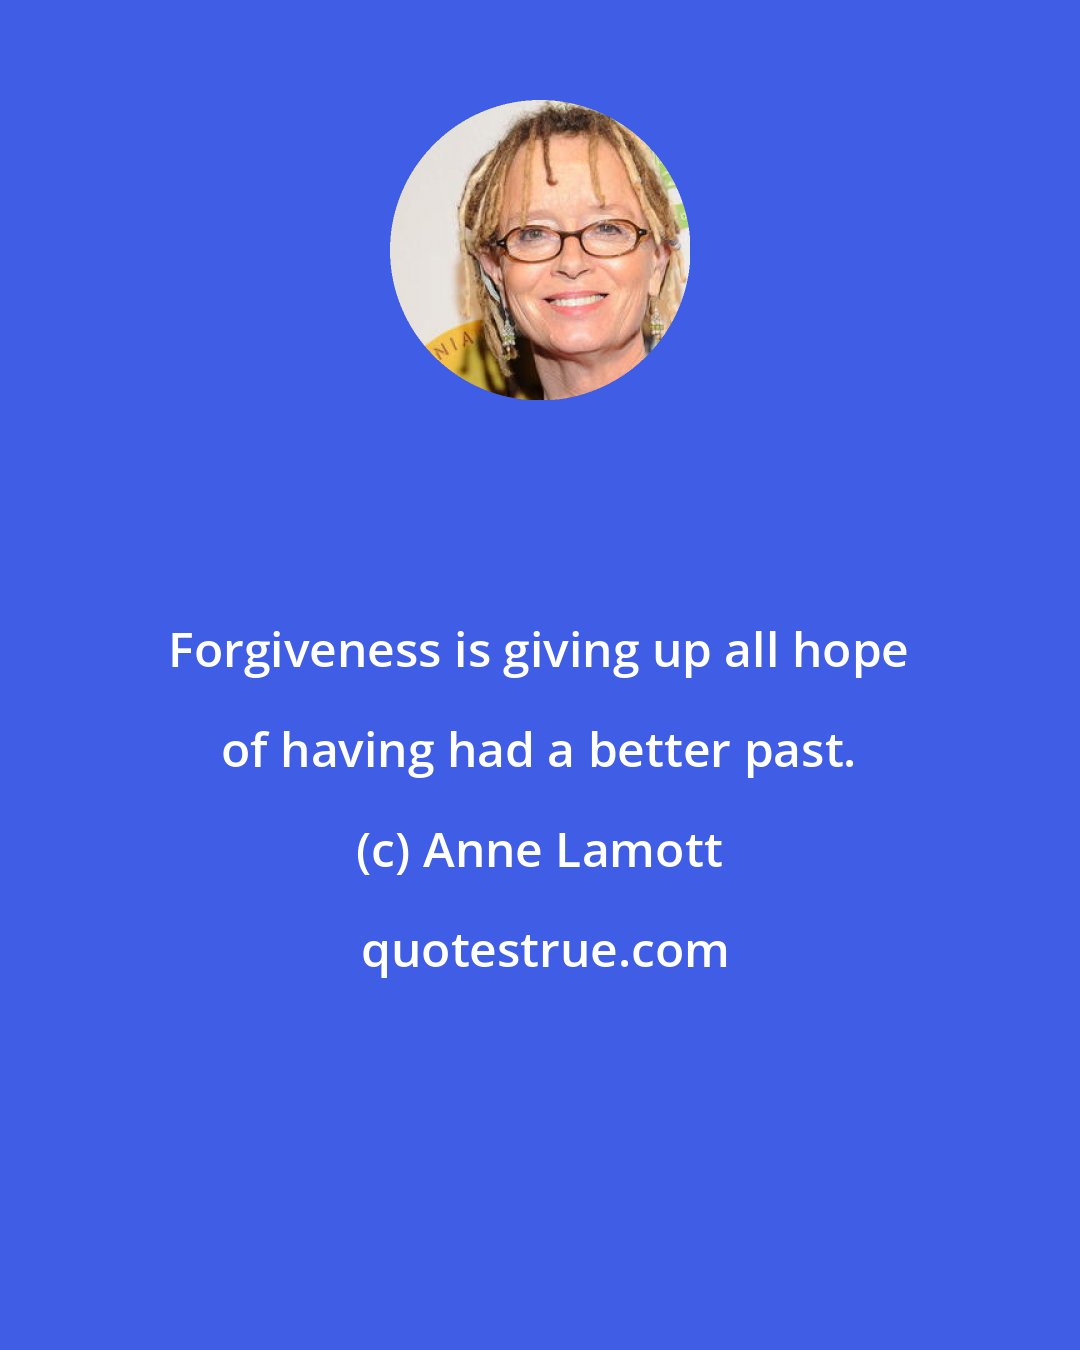 Anne Lamott: Forgiveness is giving up all hope of having had a better past.